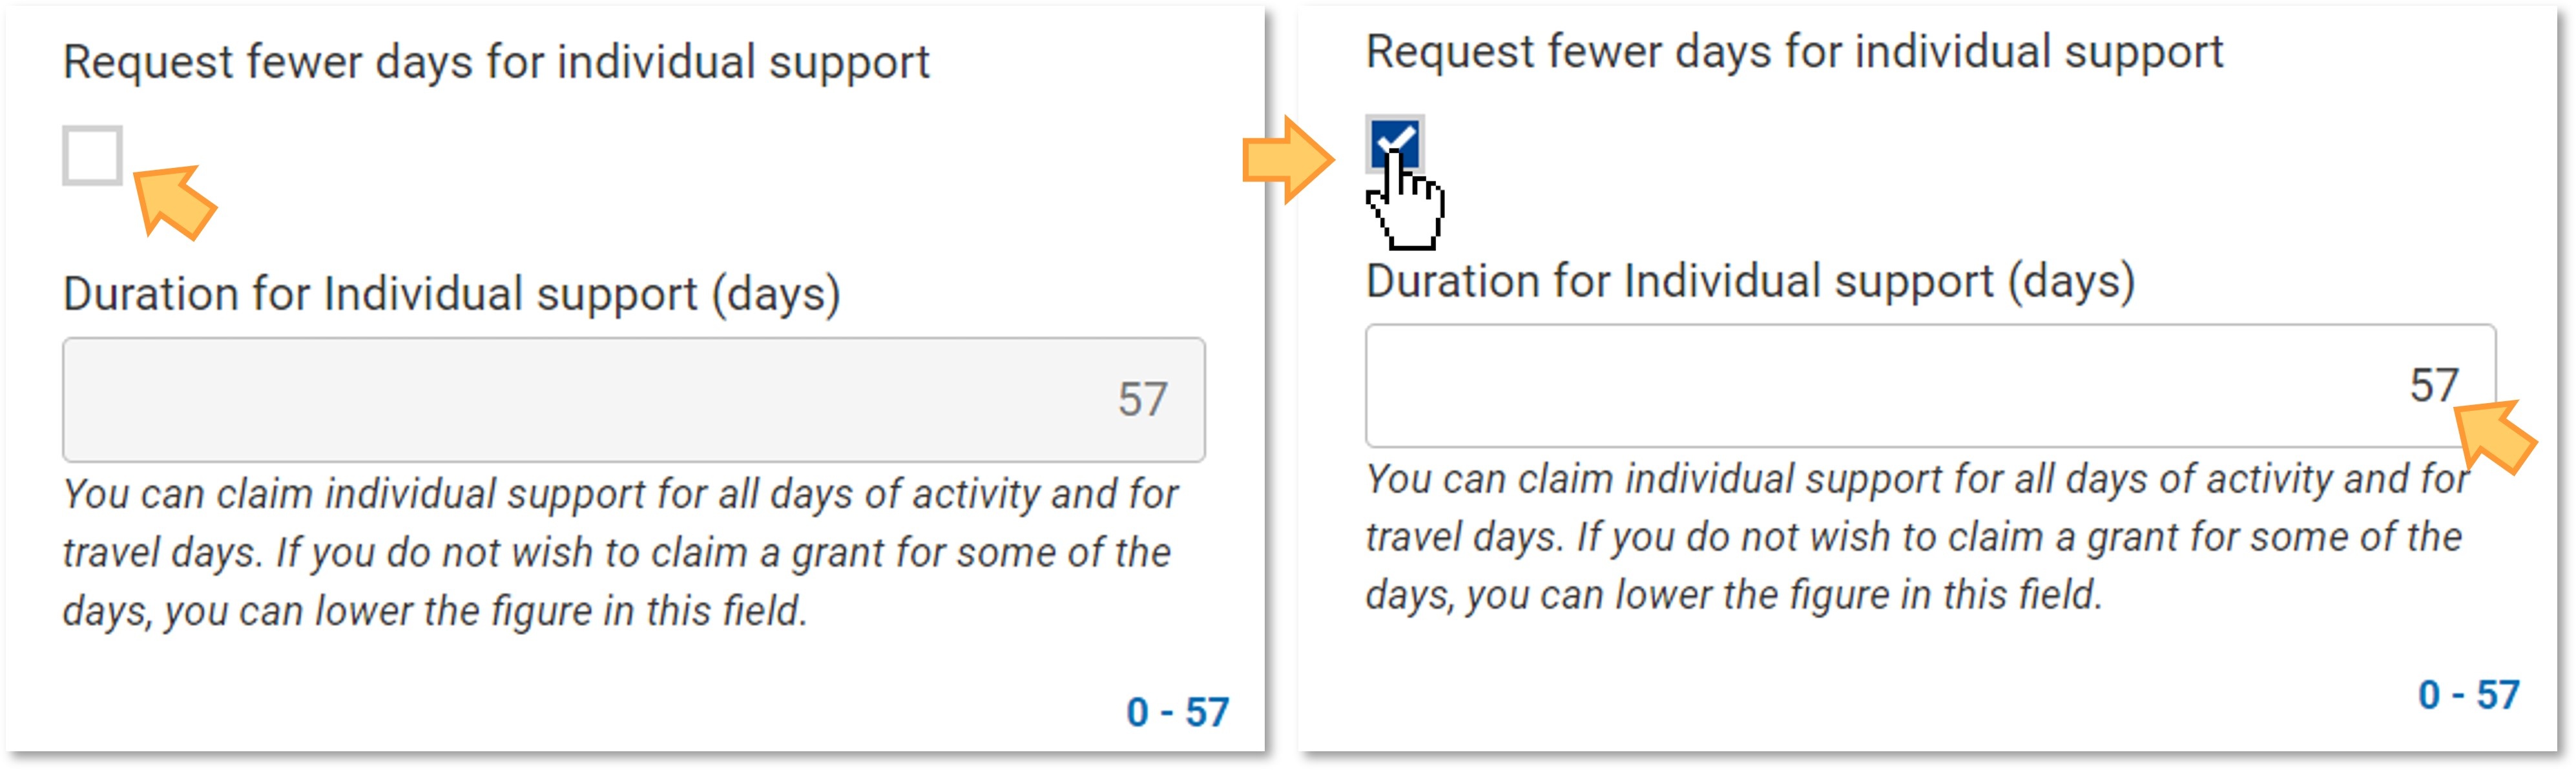 Example of the Request fewer days for individual support flag in a mobility activity